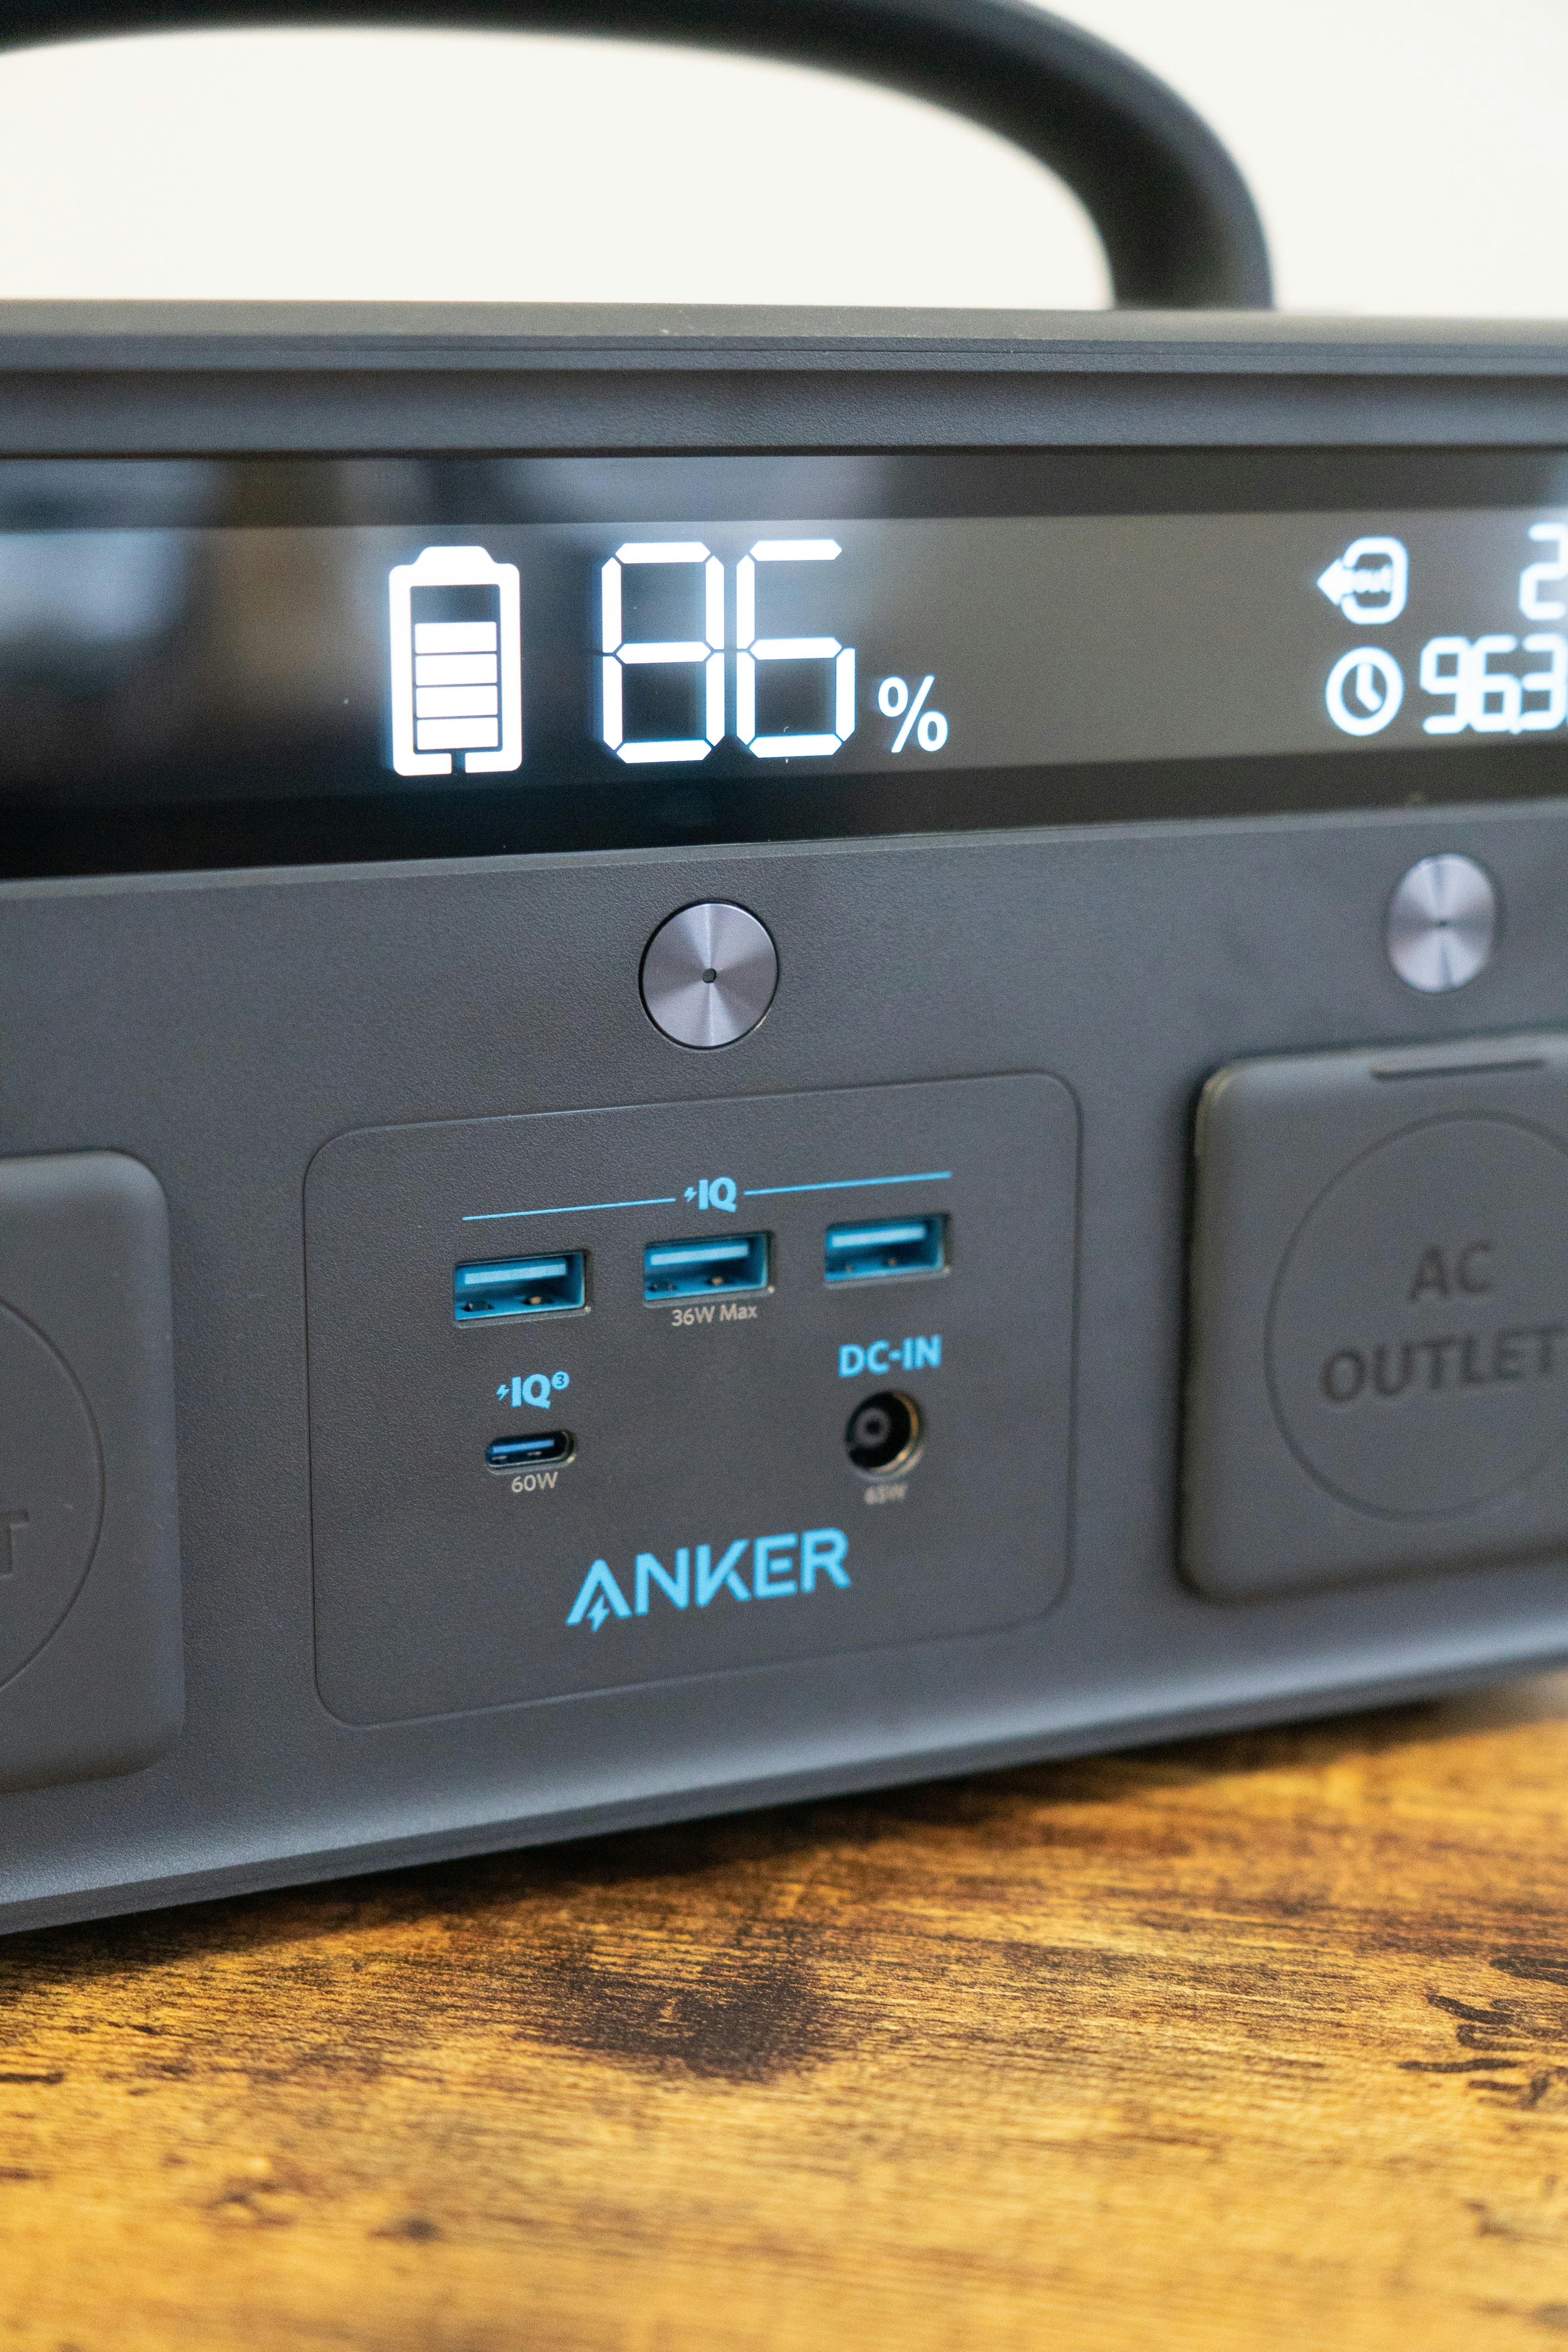 This Anker mobile generator needs to go in your prepper stash